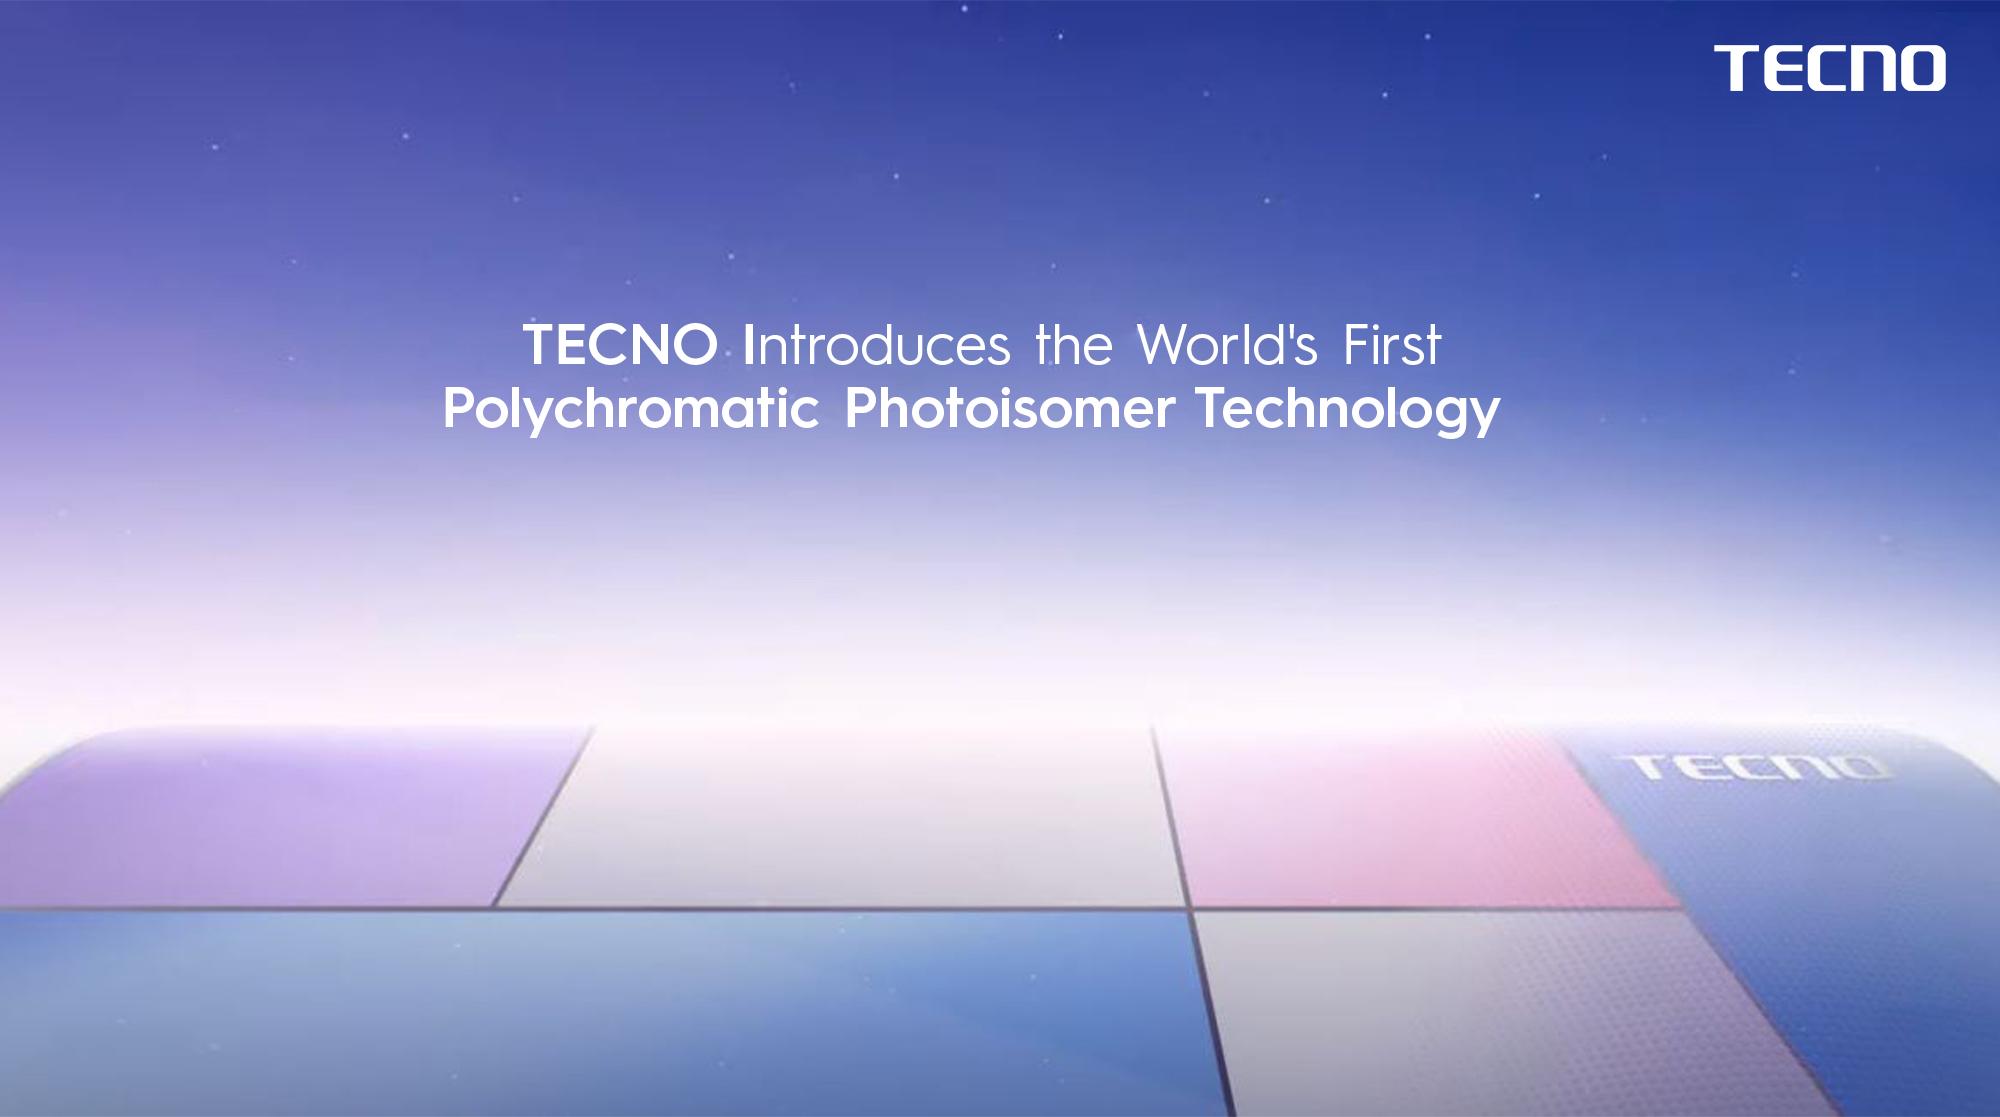 TECNO Introduces the World’s First Polychromatic Photoisomer Technology